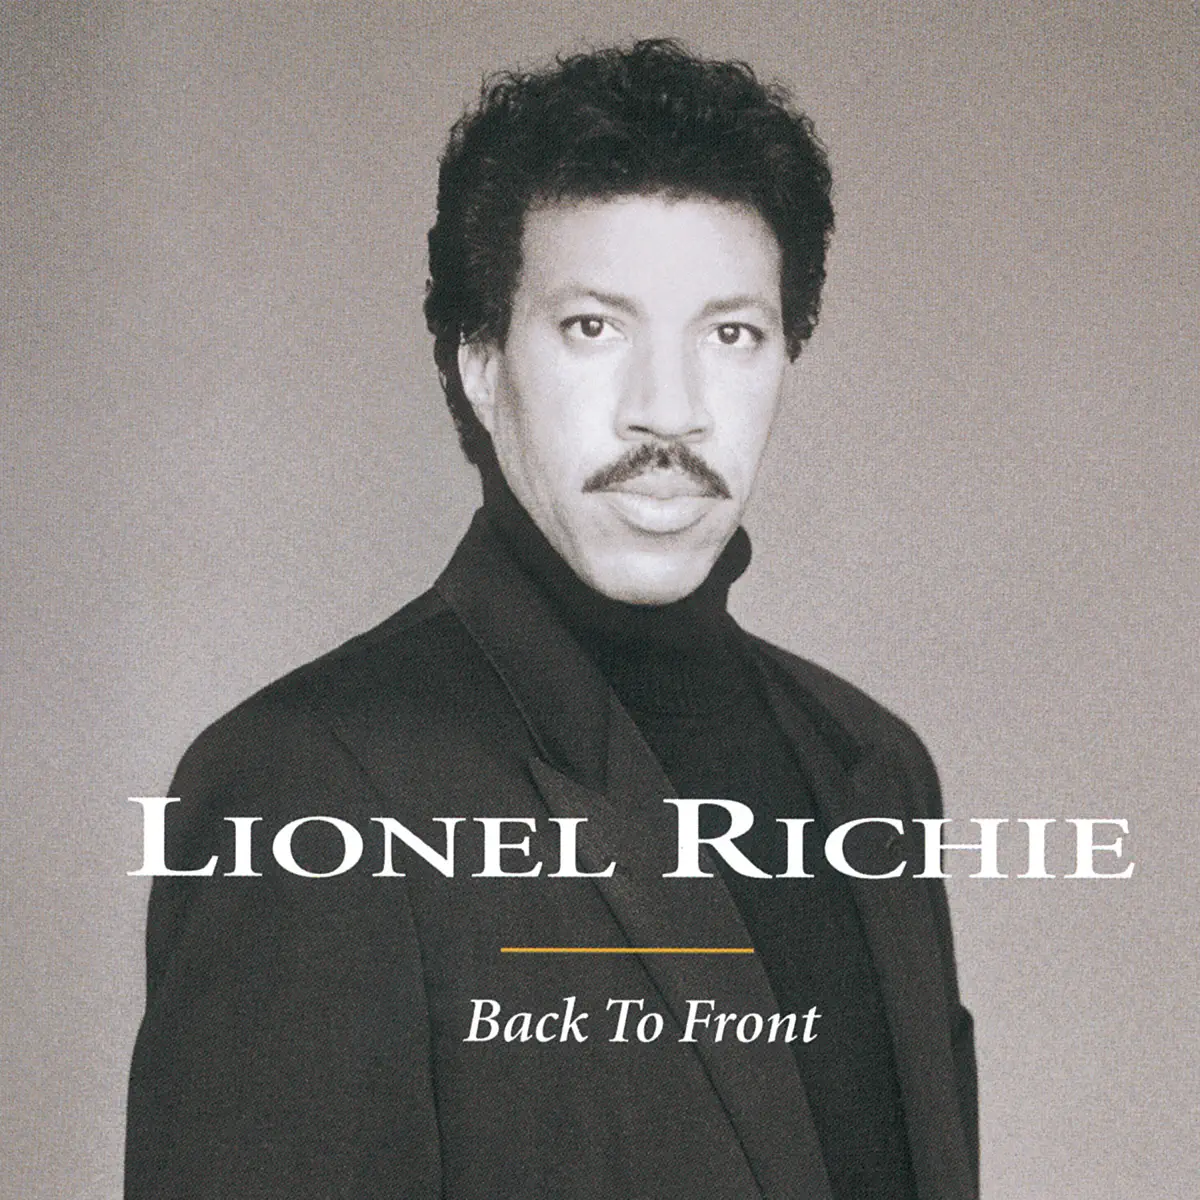 Lionel Richie - Back to Front [Apple Digital Master] (1992) [iTunes Plus AAC M4A]-新房子